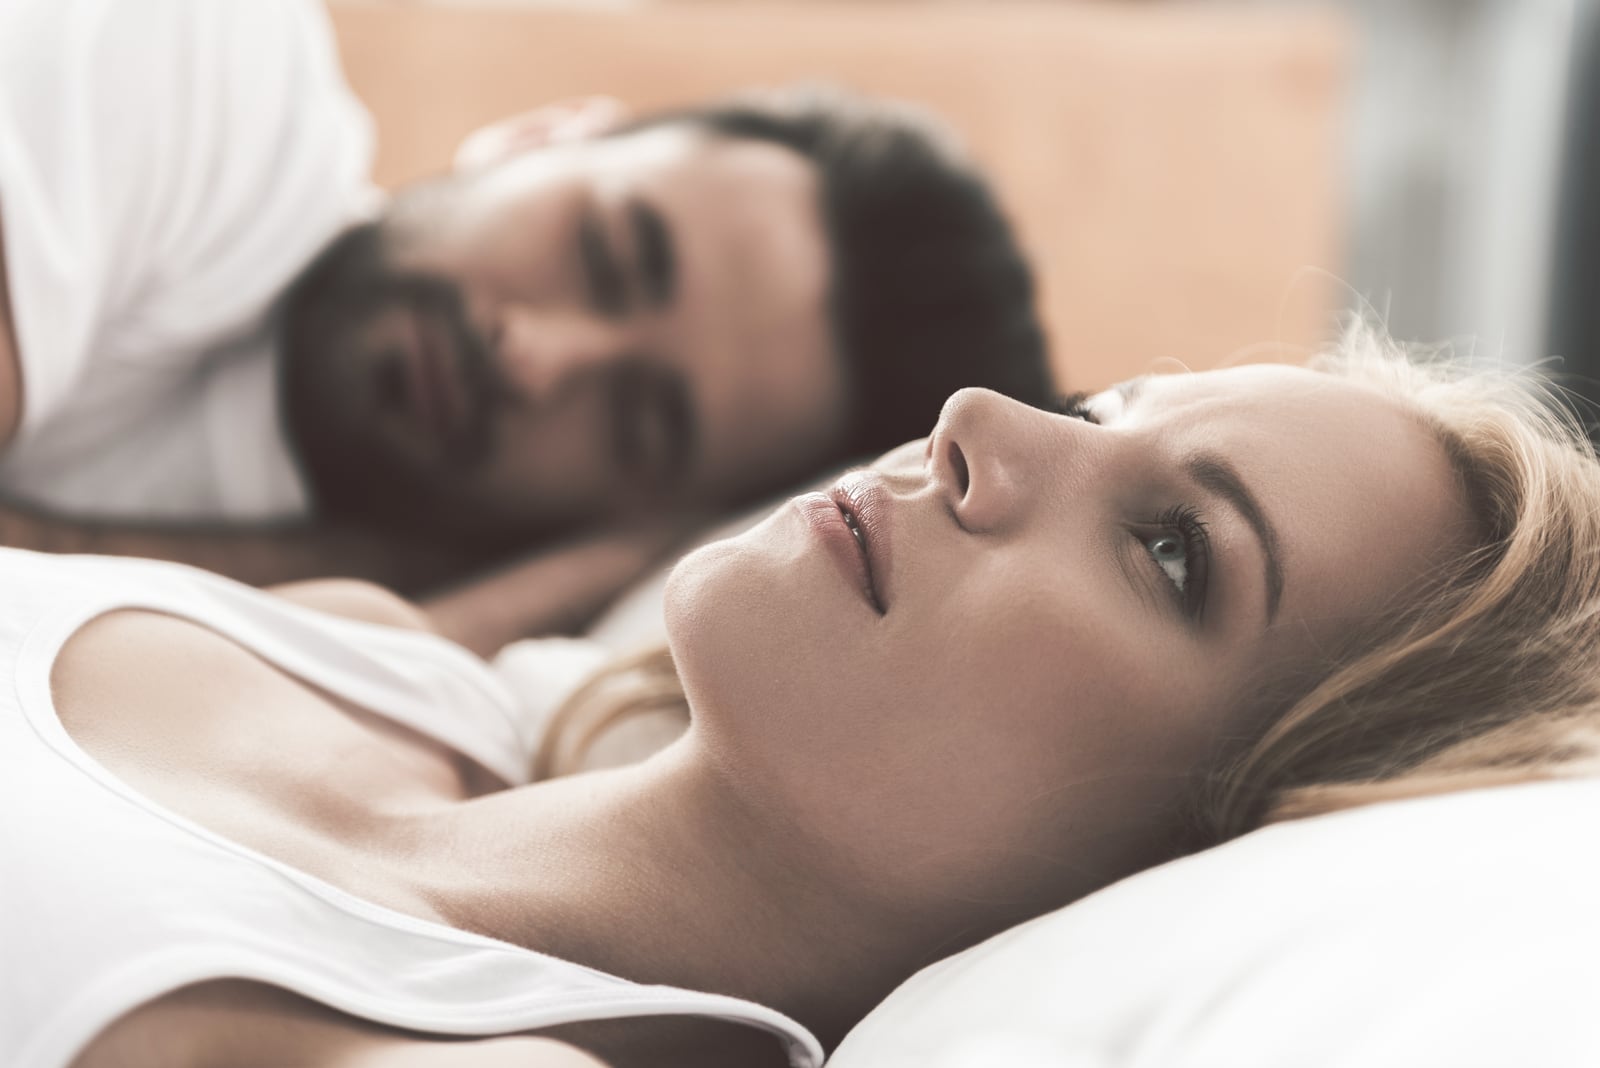 sad woman lying in bed with man